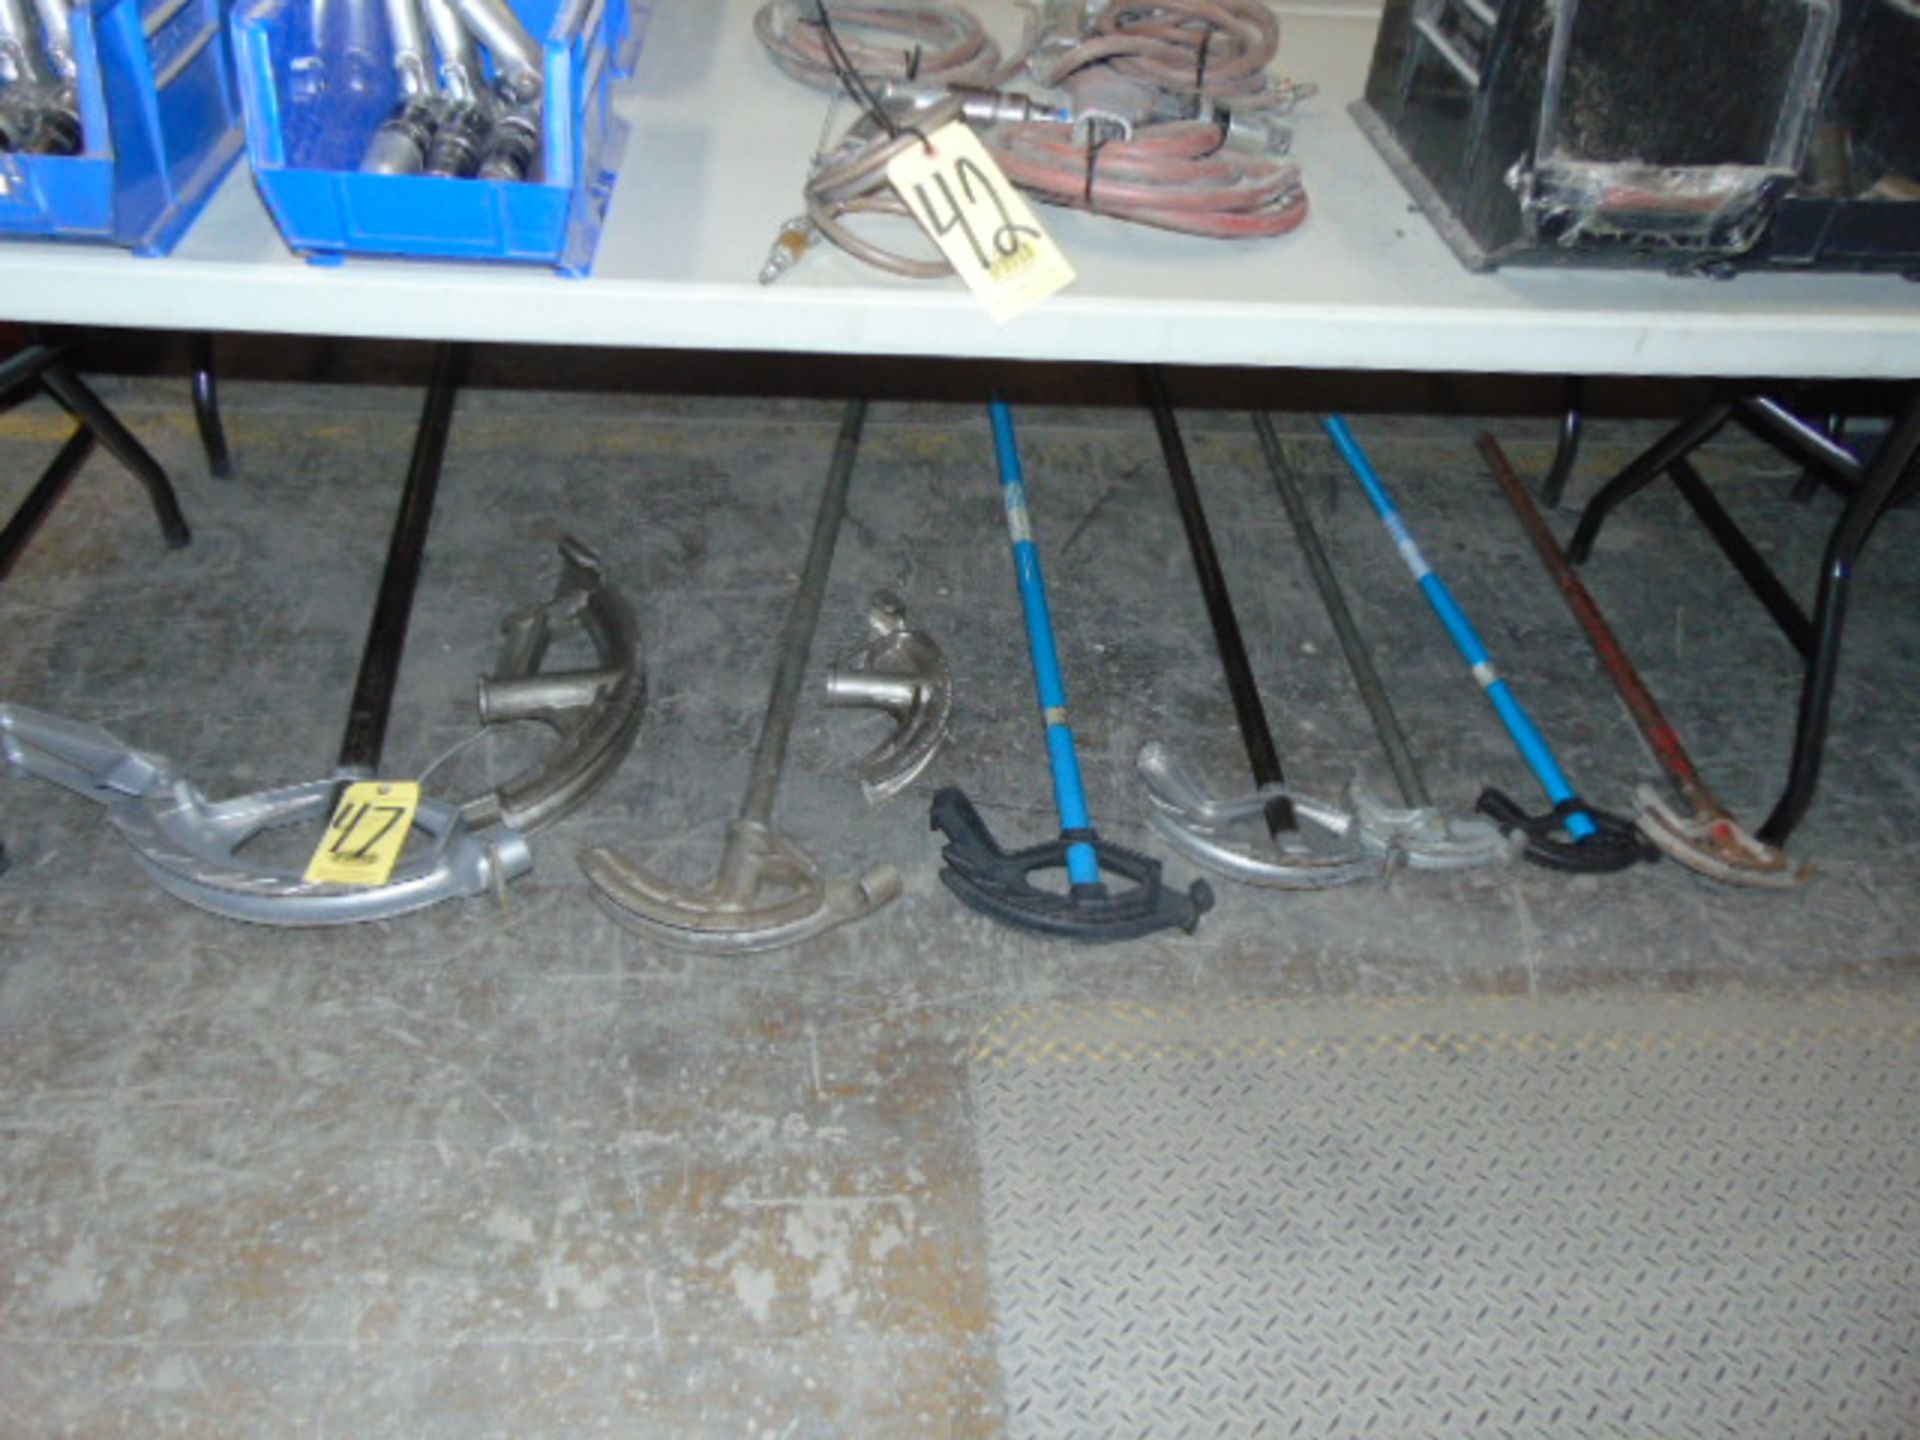 LOT OF CONDUIT BENDERS, assorted (under one bench)